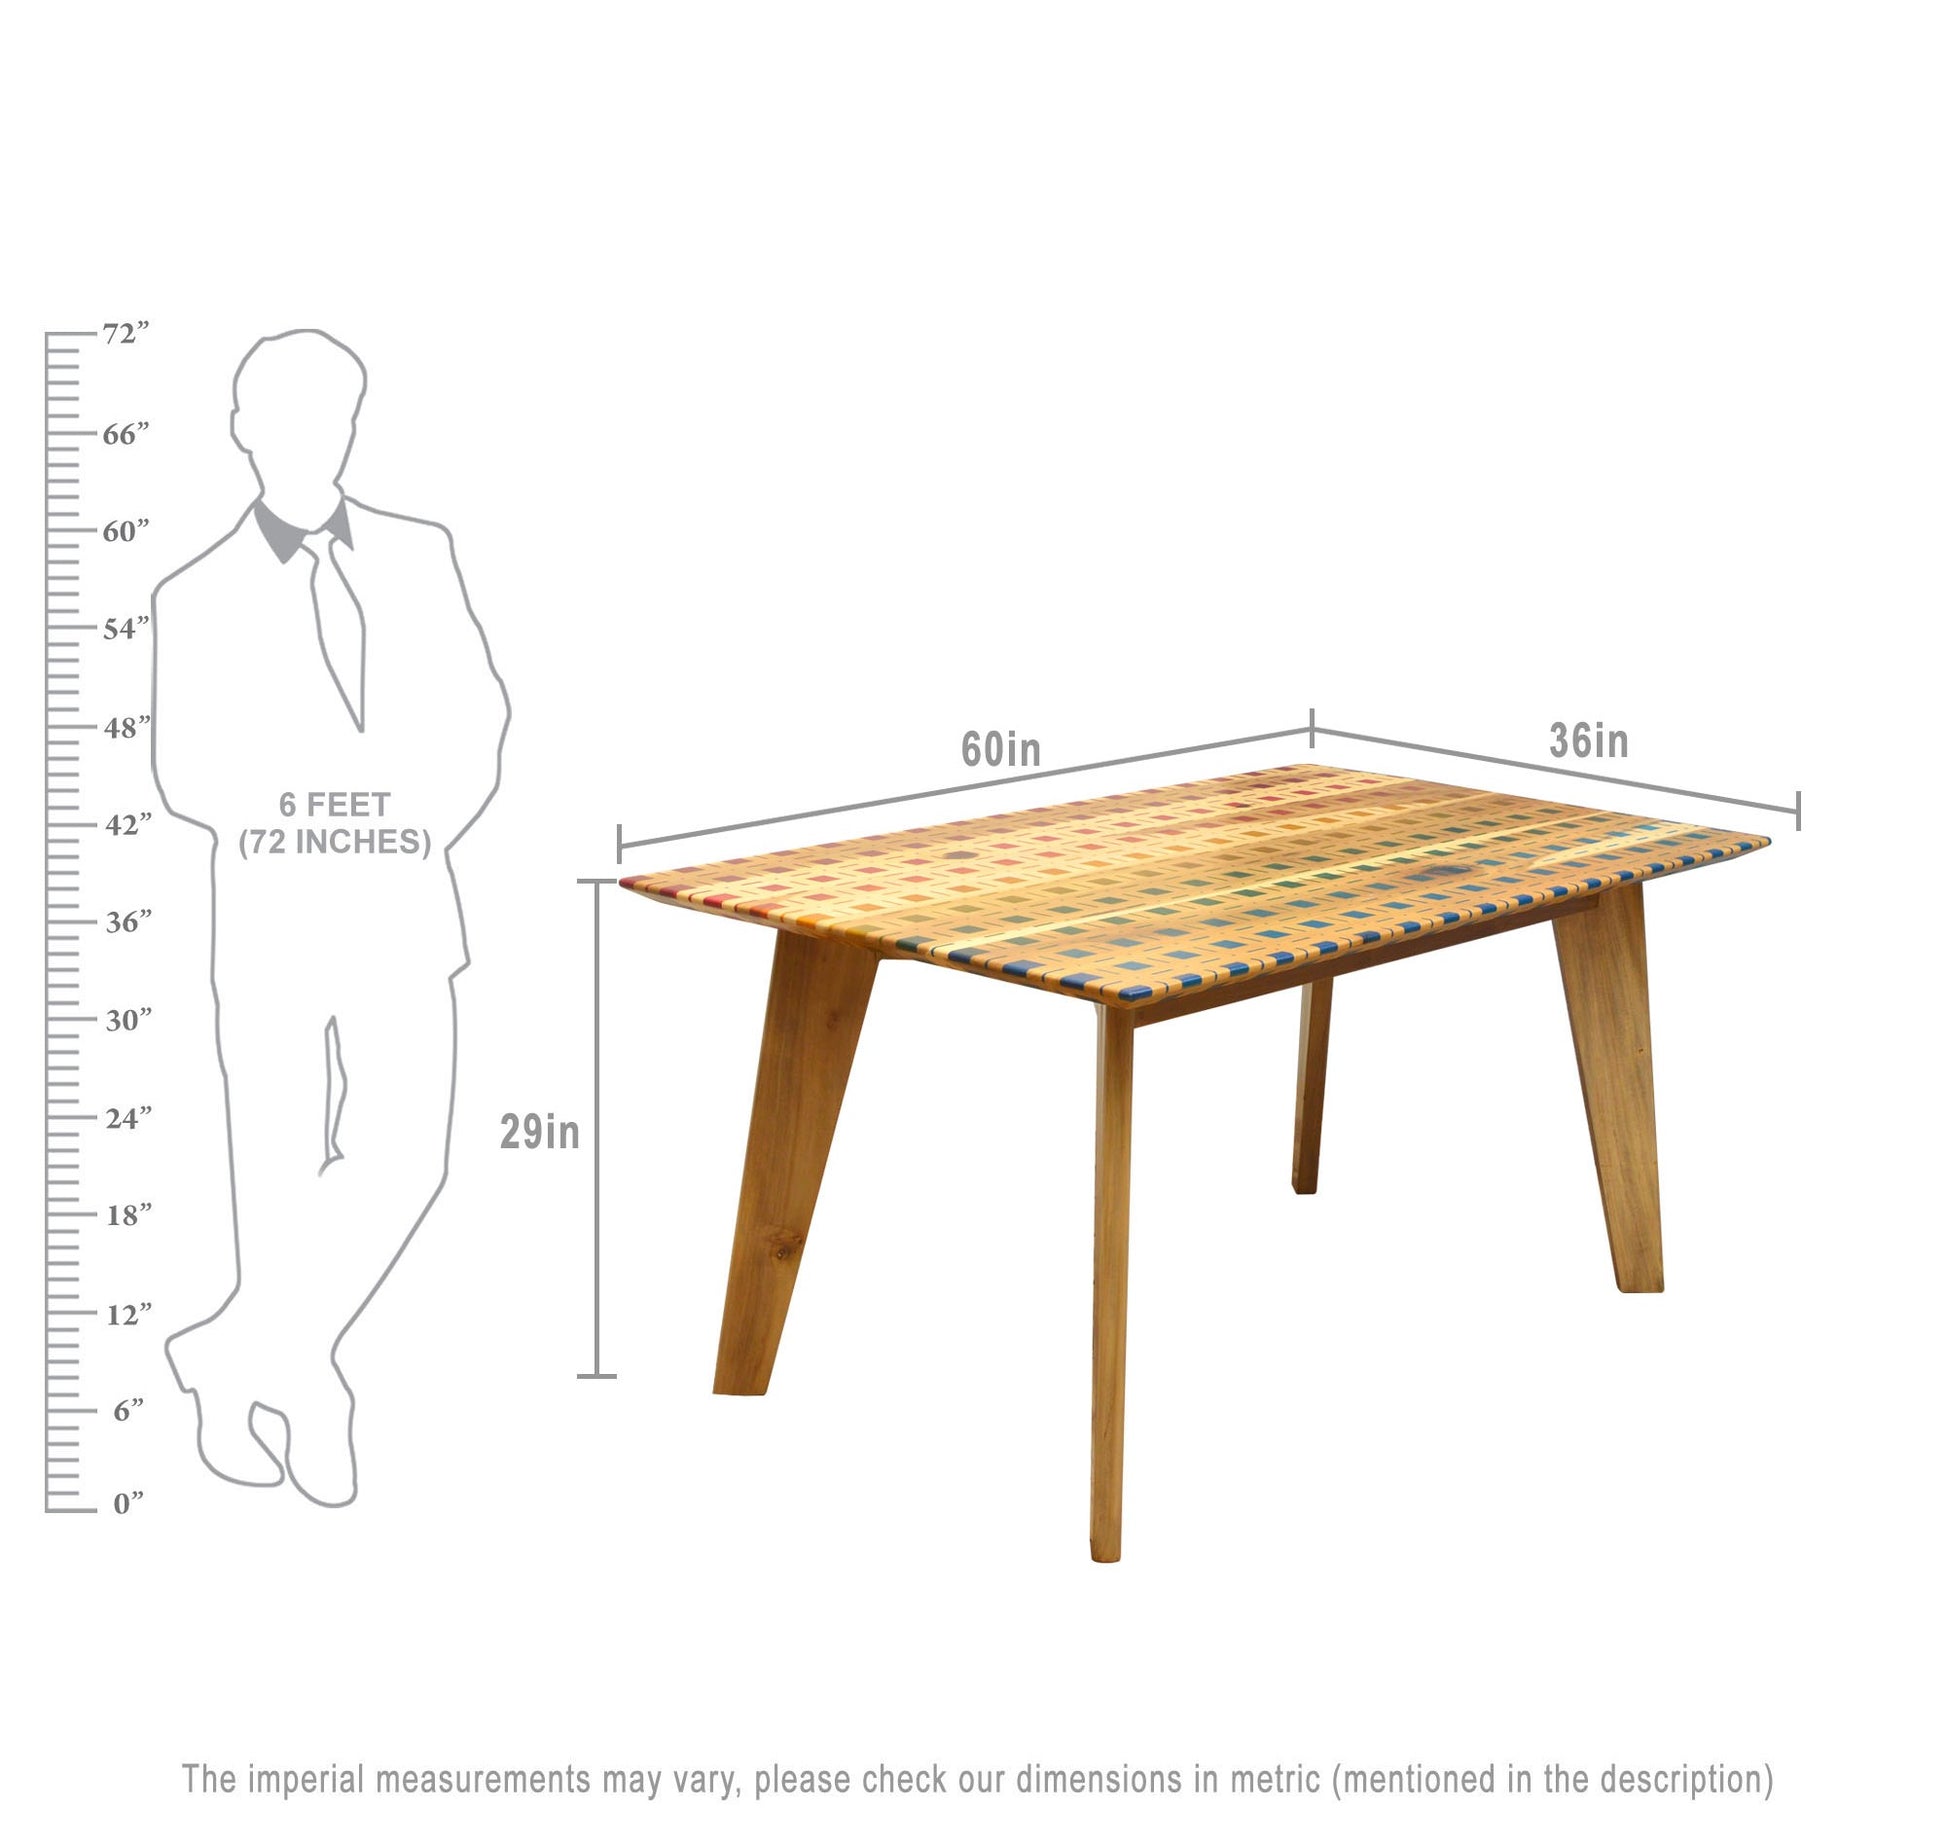 Table comparison with human being